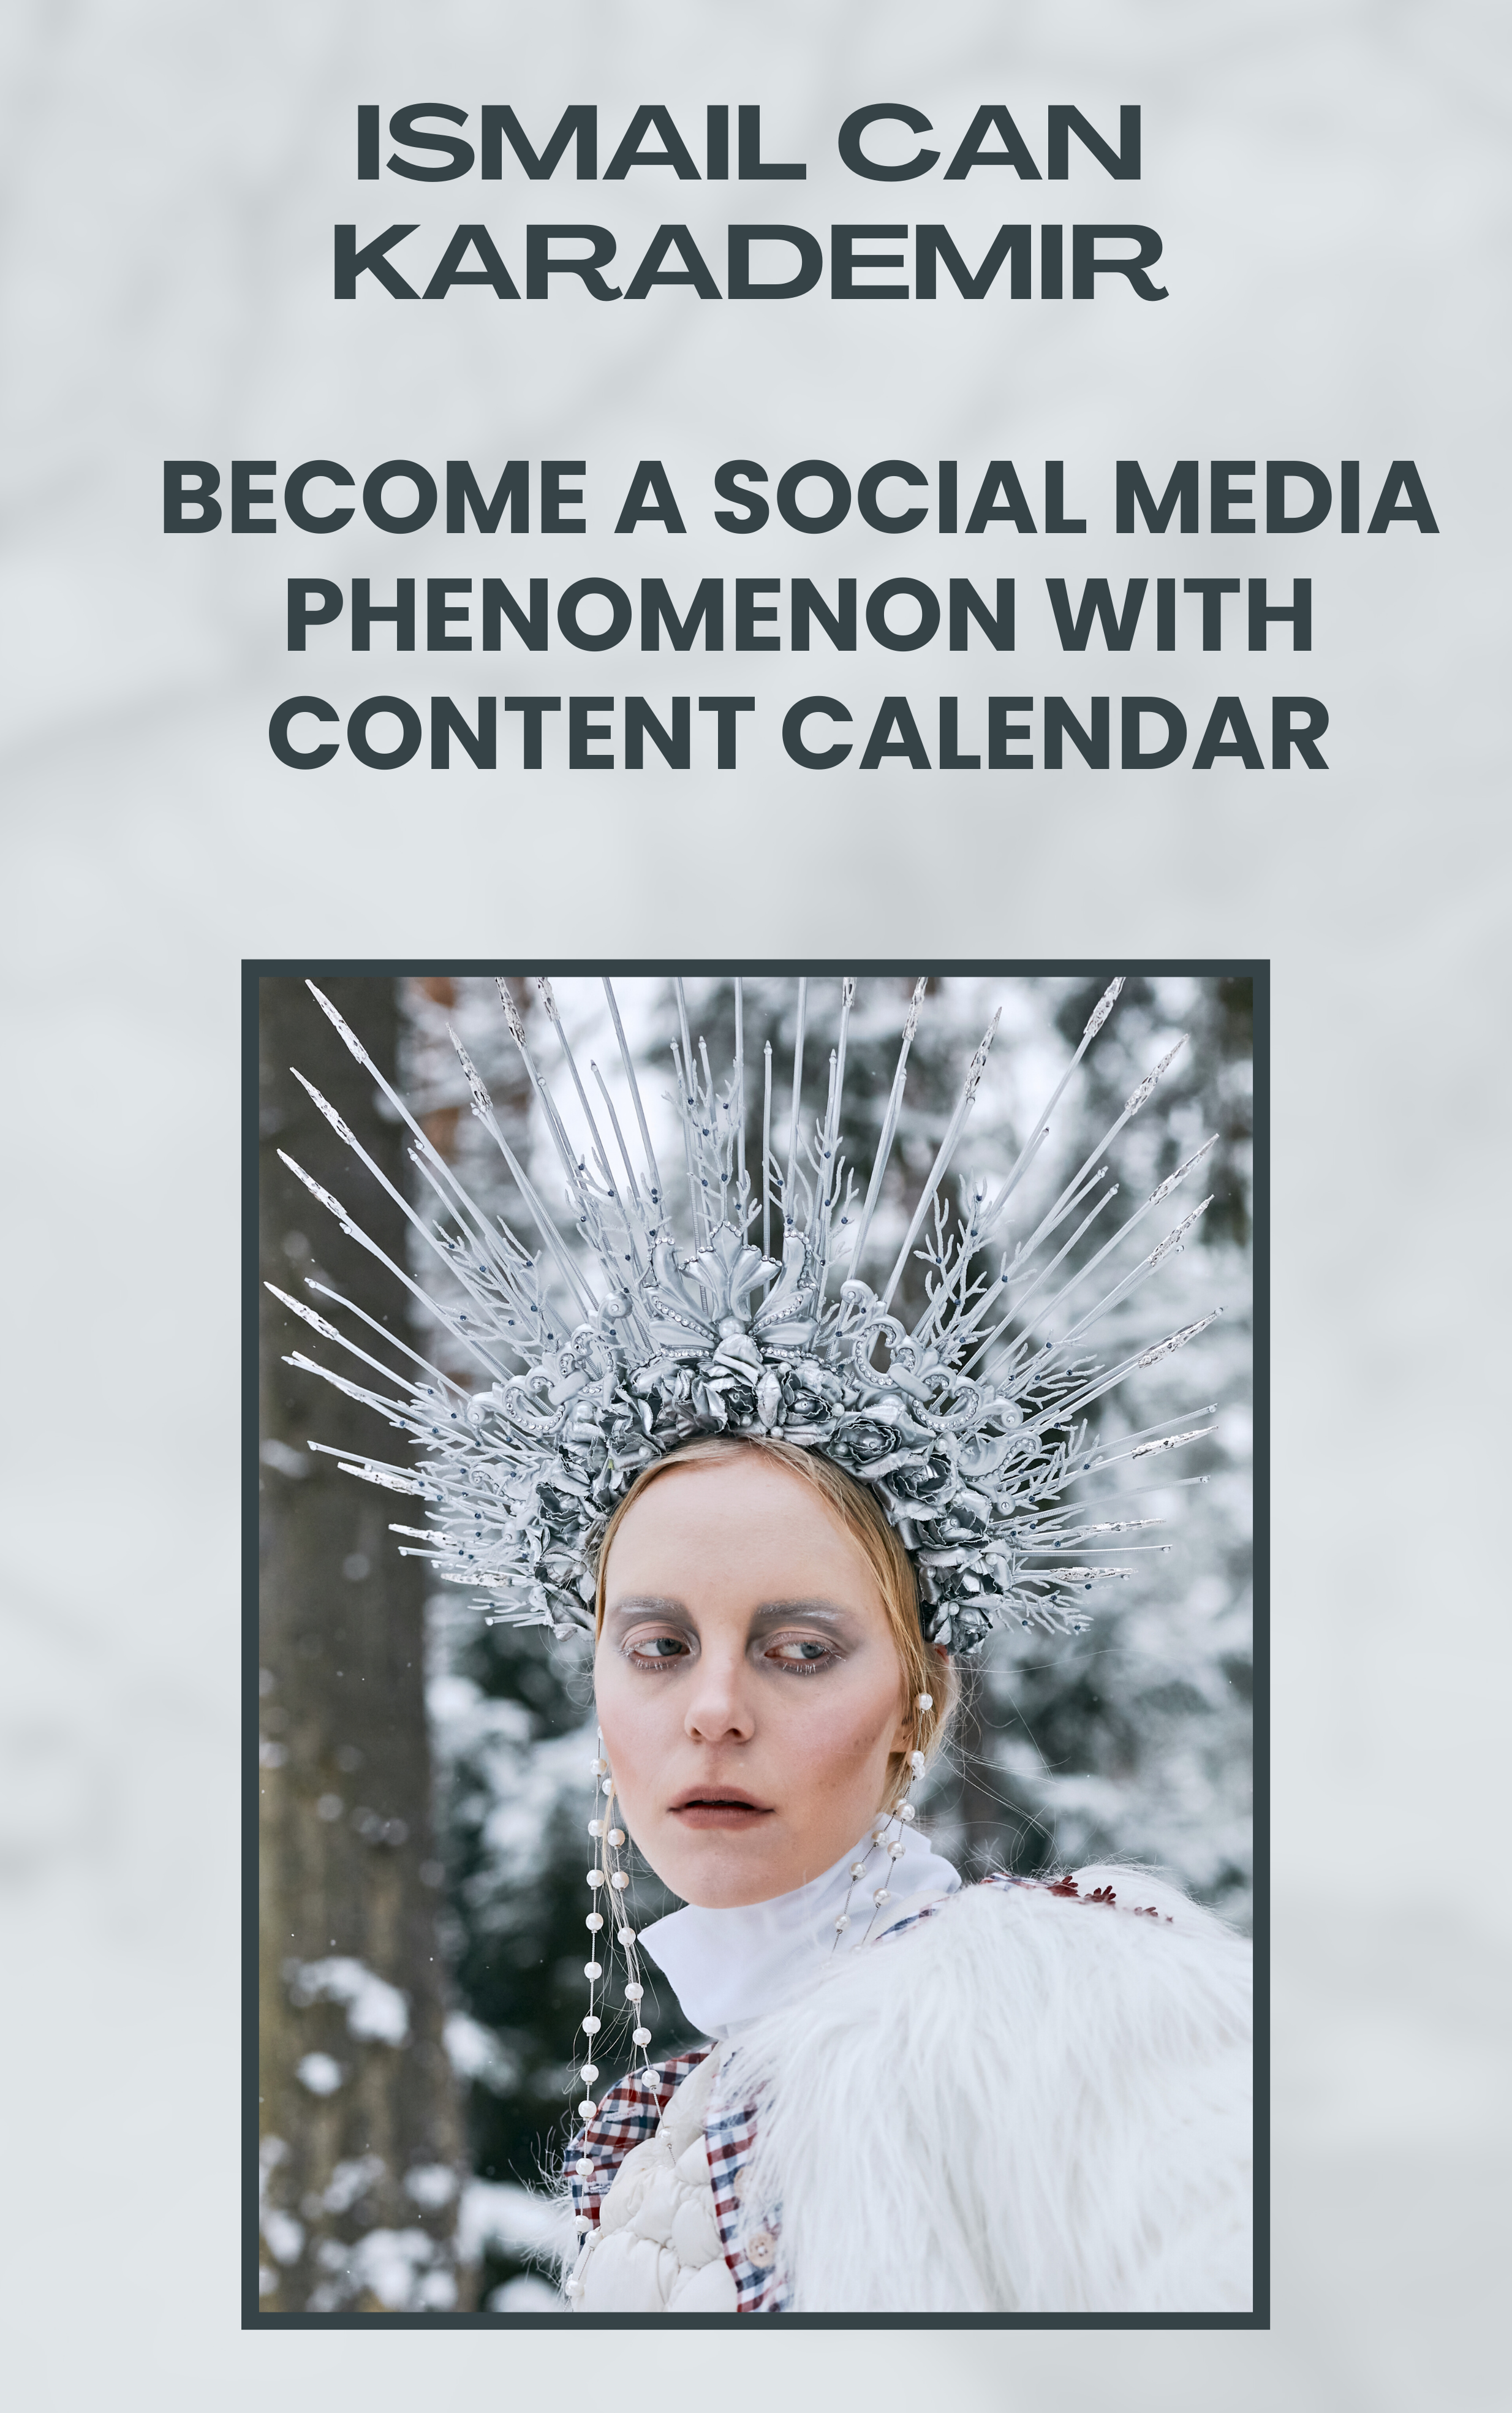 Become a Social Media Phenomenon with Content Calendar Available in Big Book Stores!